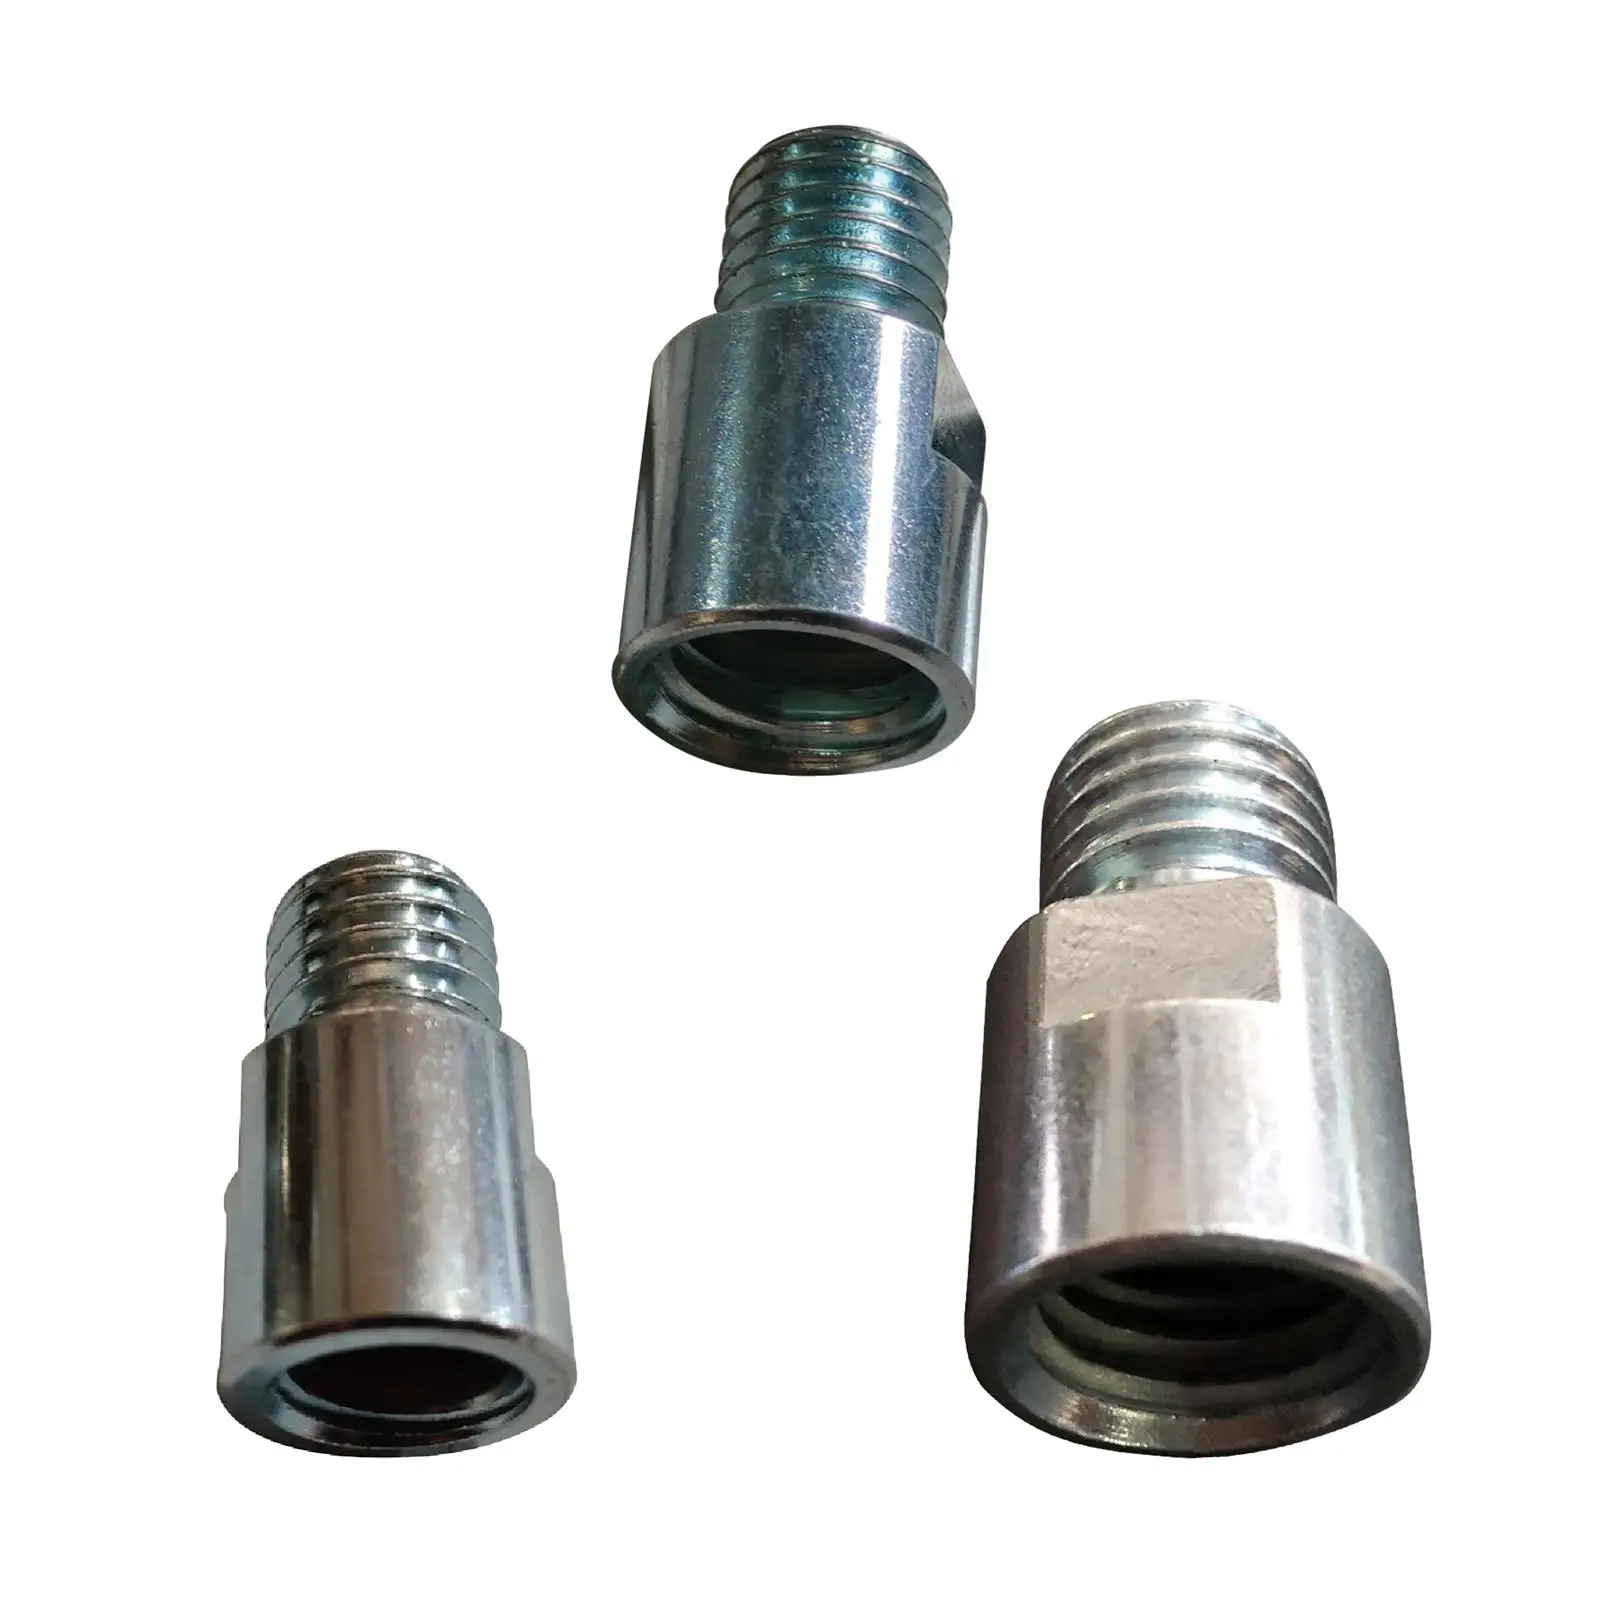 Angle Grinder Adapter Converter Polisher Interface Connector Quick Connect Angle Grinder Thread Adapter for Angle Grinder Tools